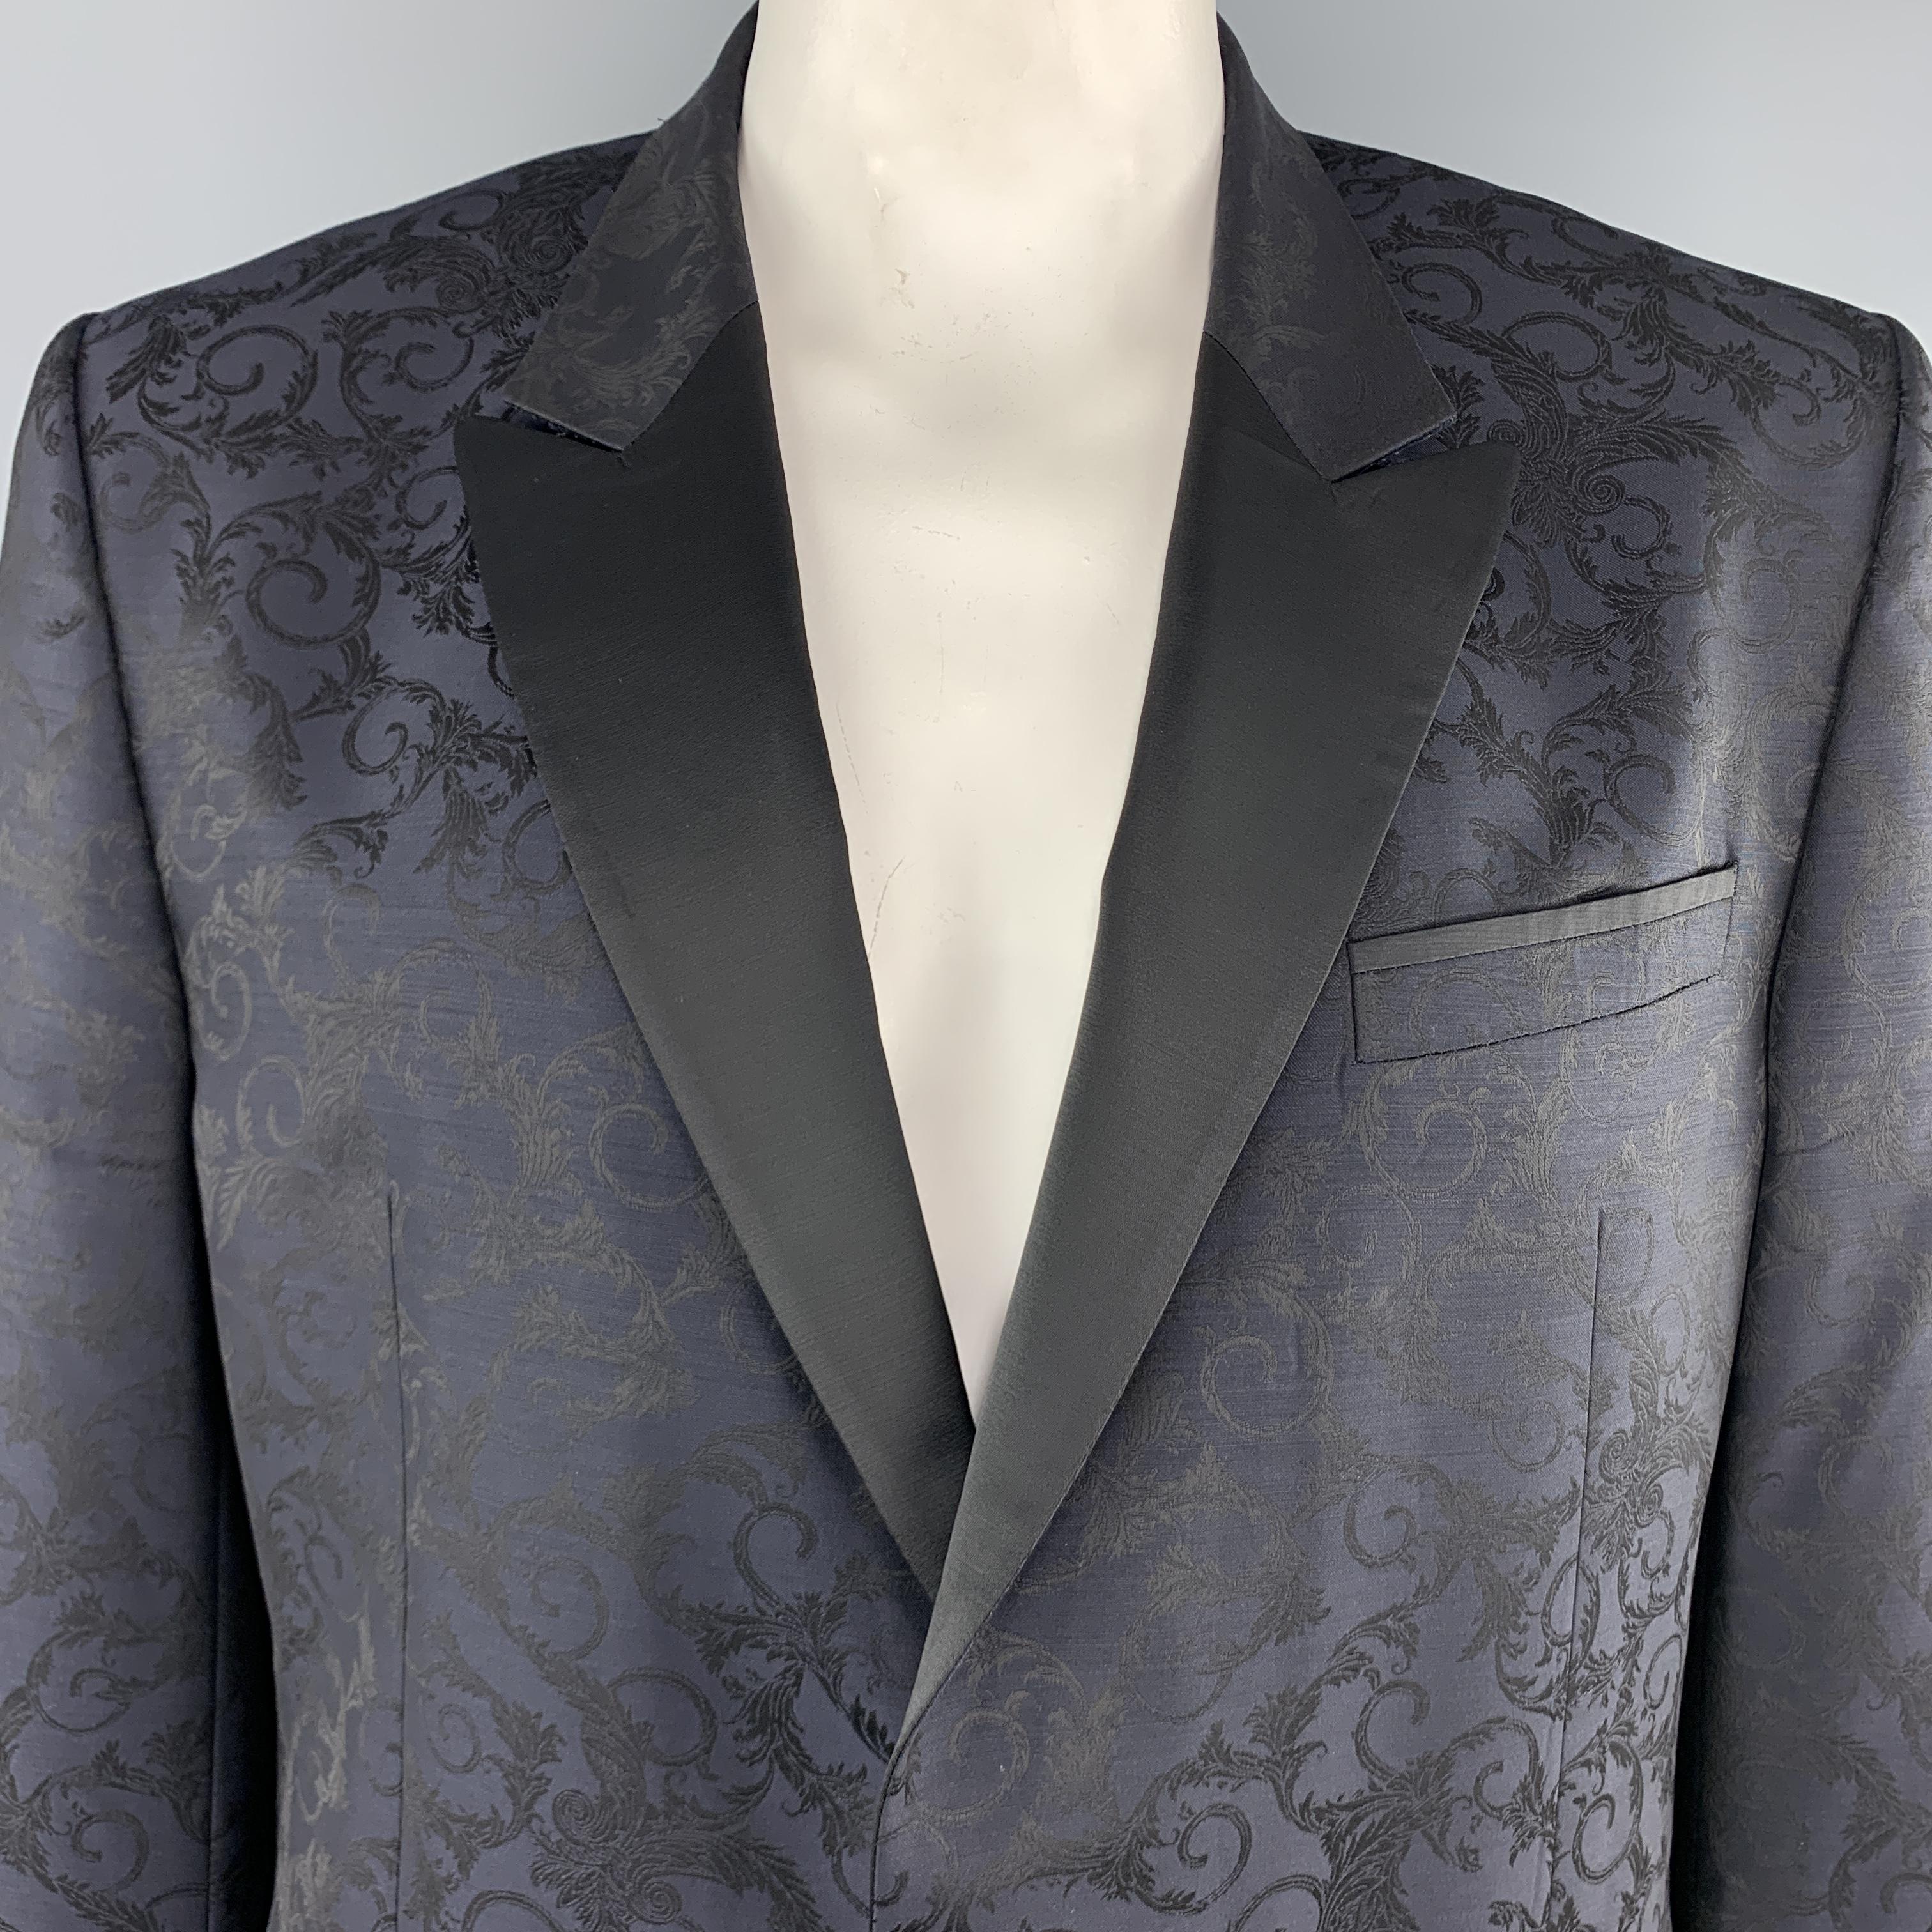 VERSACE COLLECTION dinner jacket comes in navy and black baroque print jacquard and features a satin peak lapel, single breasted, one button closure, and single vented back. 

Excellent Pre-Owned Condition.
Marked: IT 56

Measurements:

Shoulder: 19